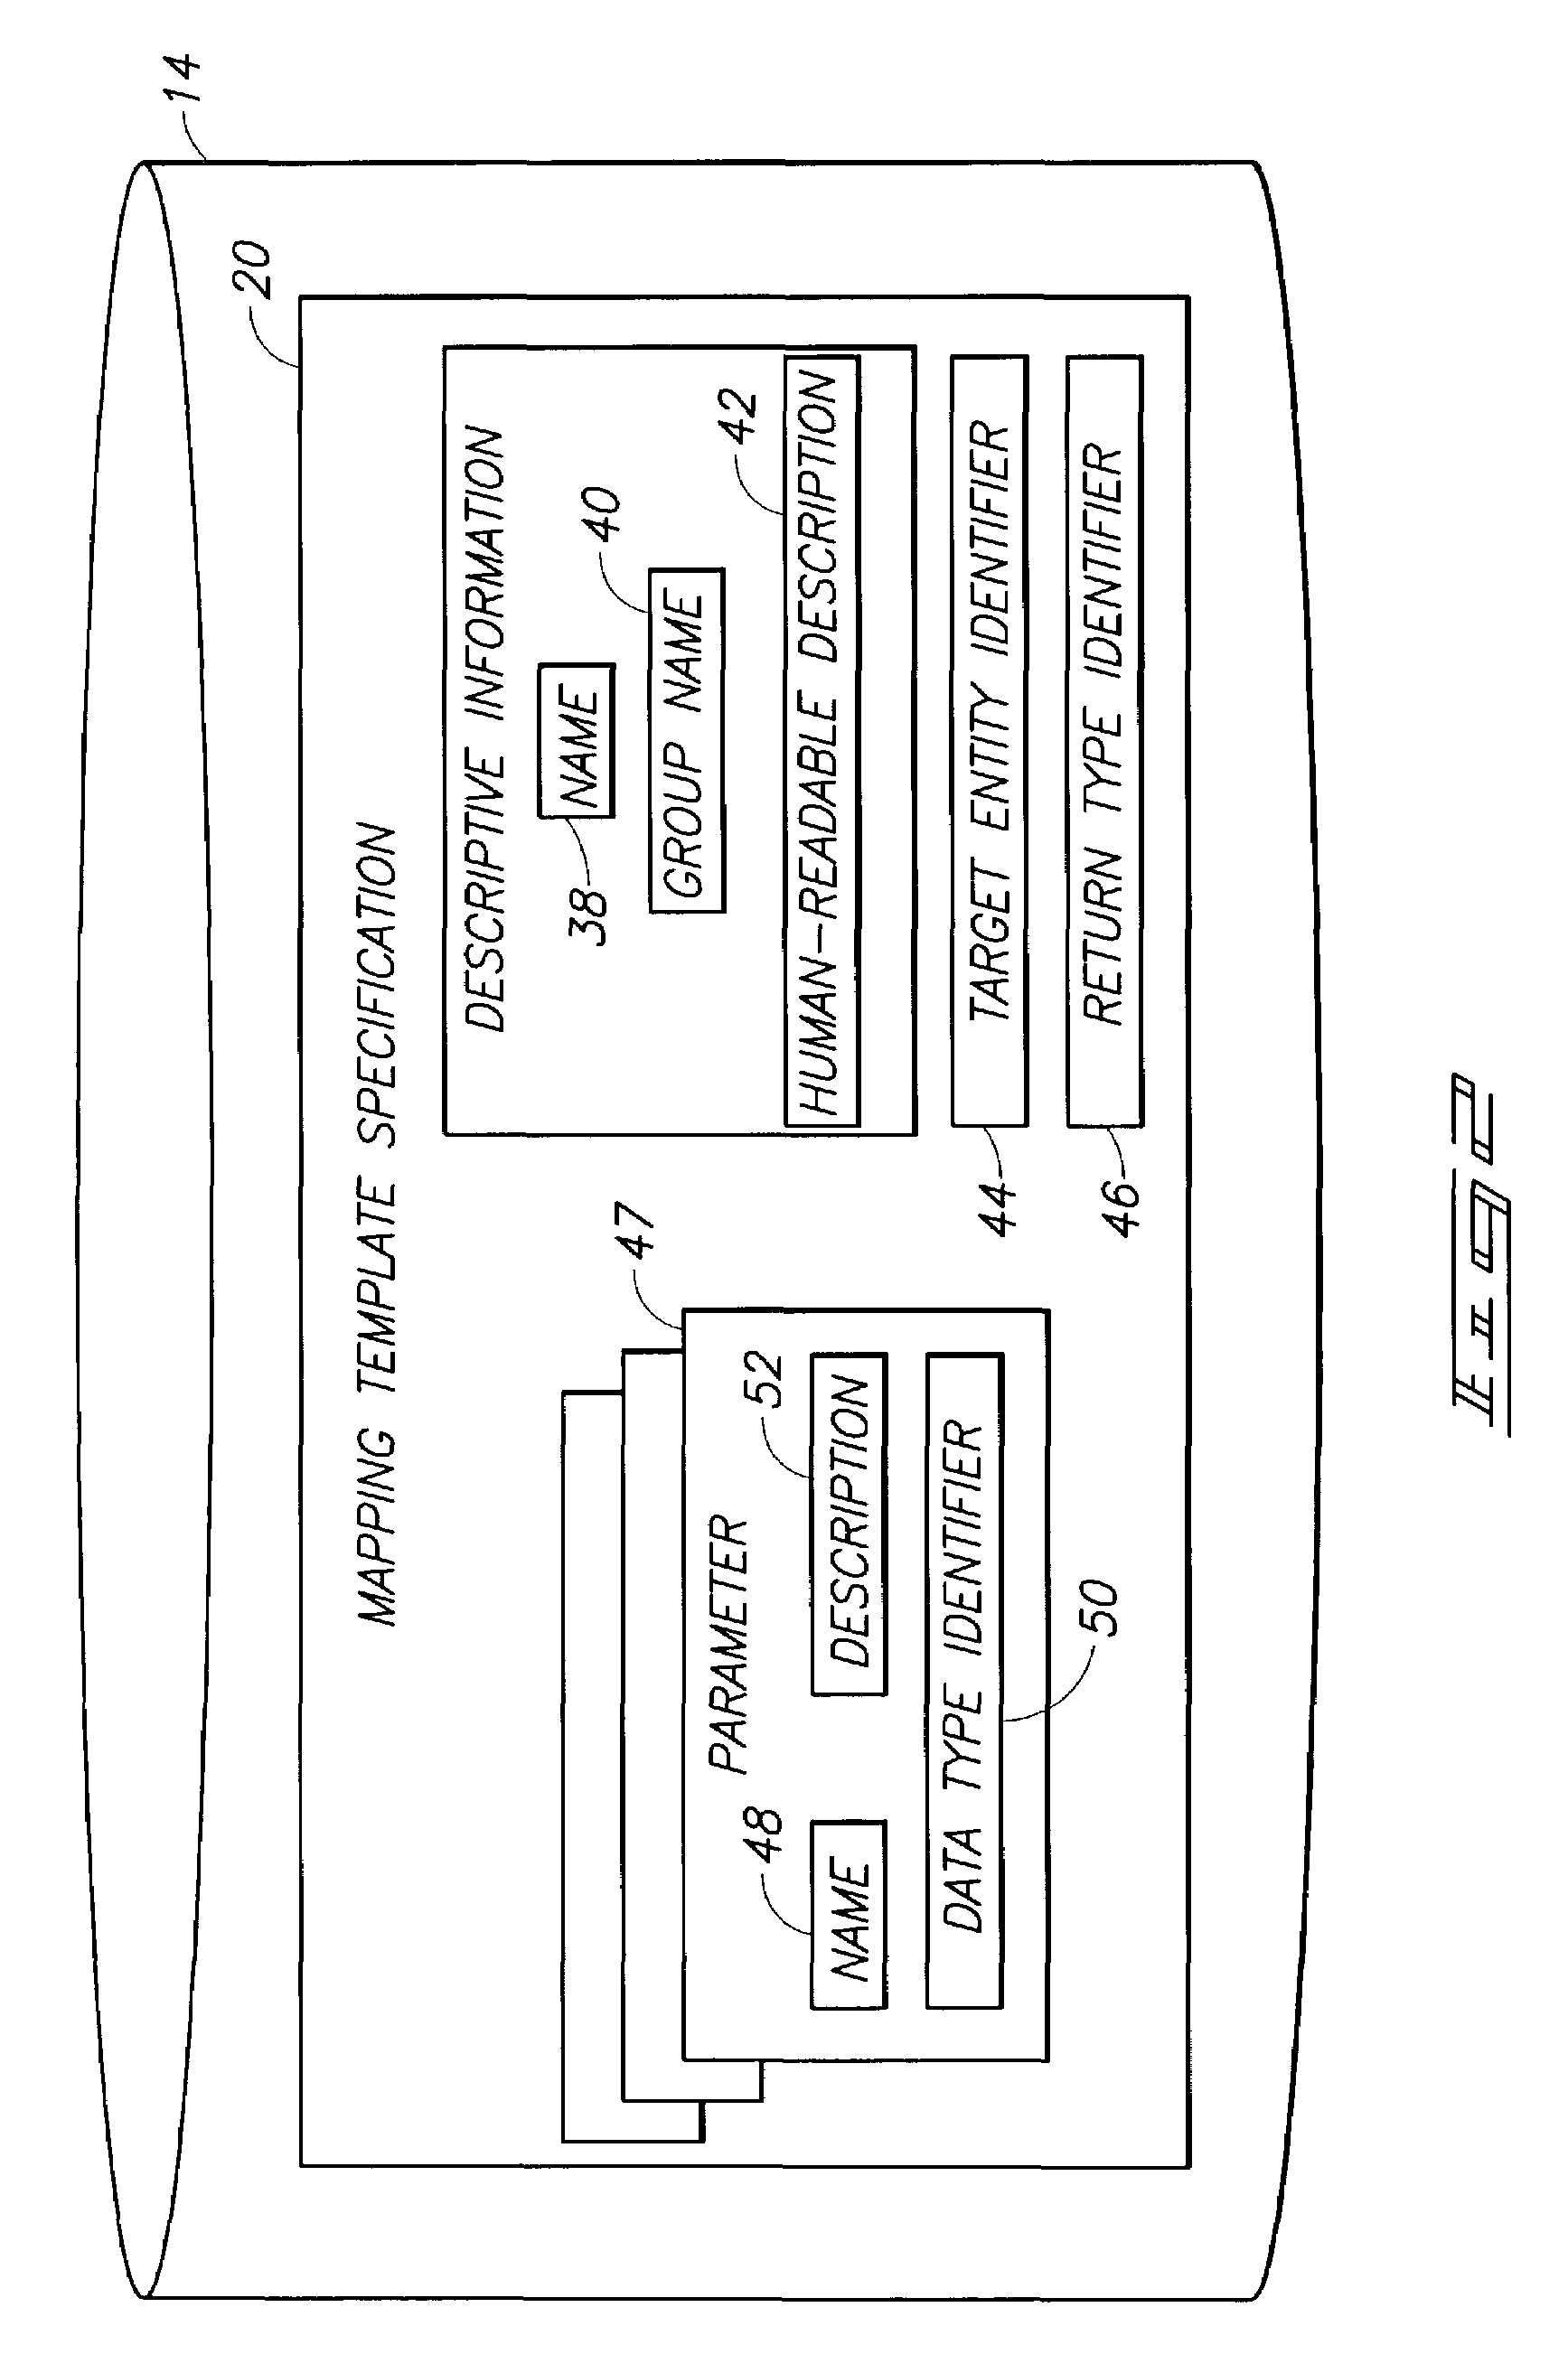 System and method for monitoring event based systems